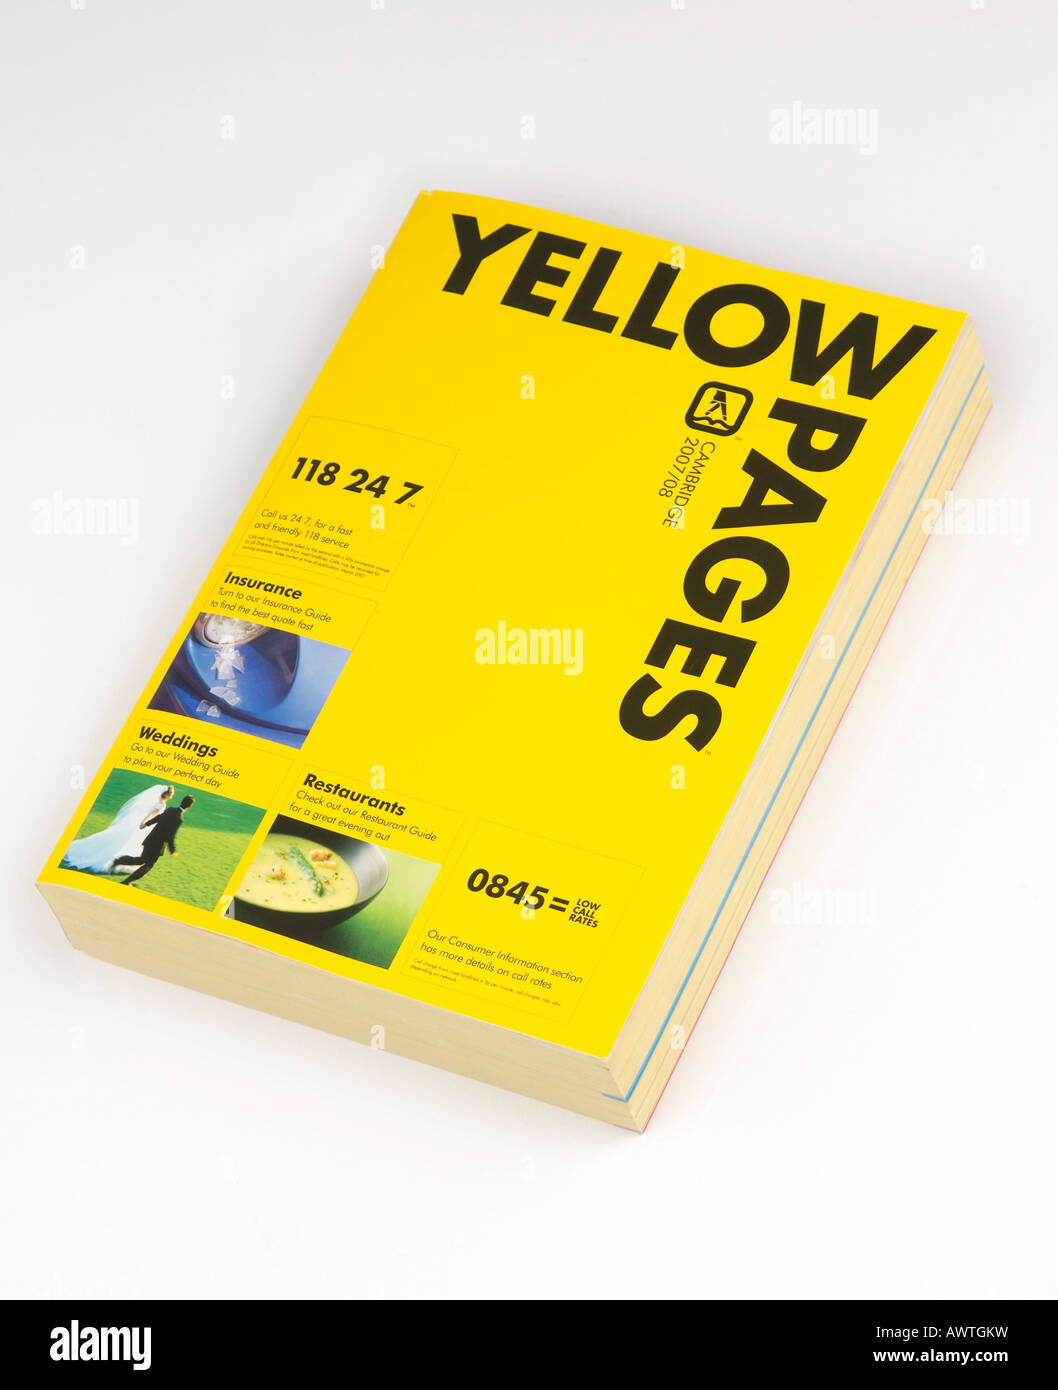 Yellow Pages phone directory Stock Photo: 16651500 - Alamy